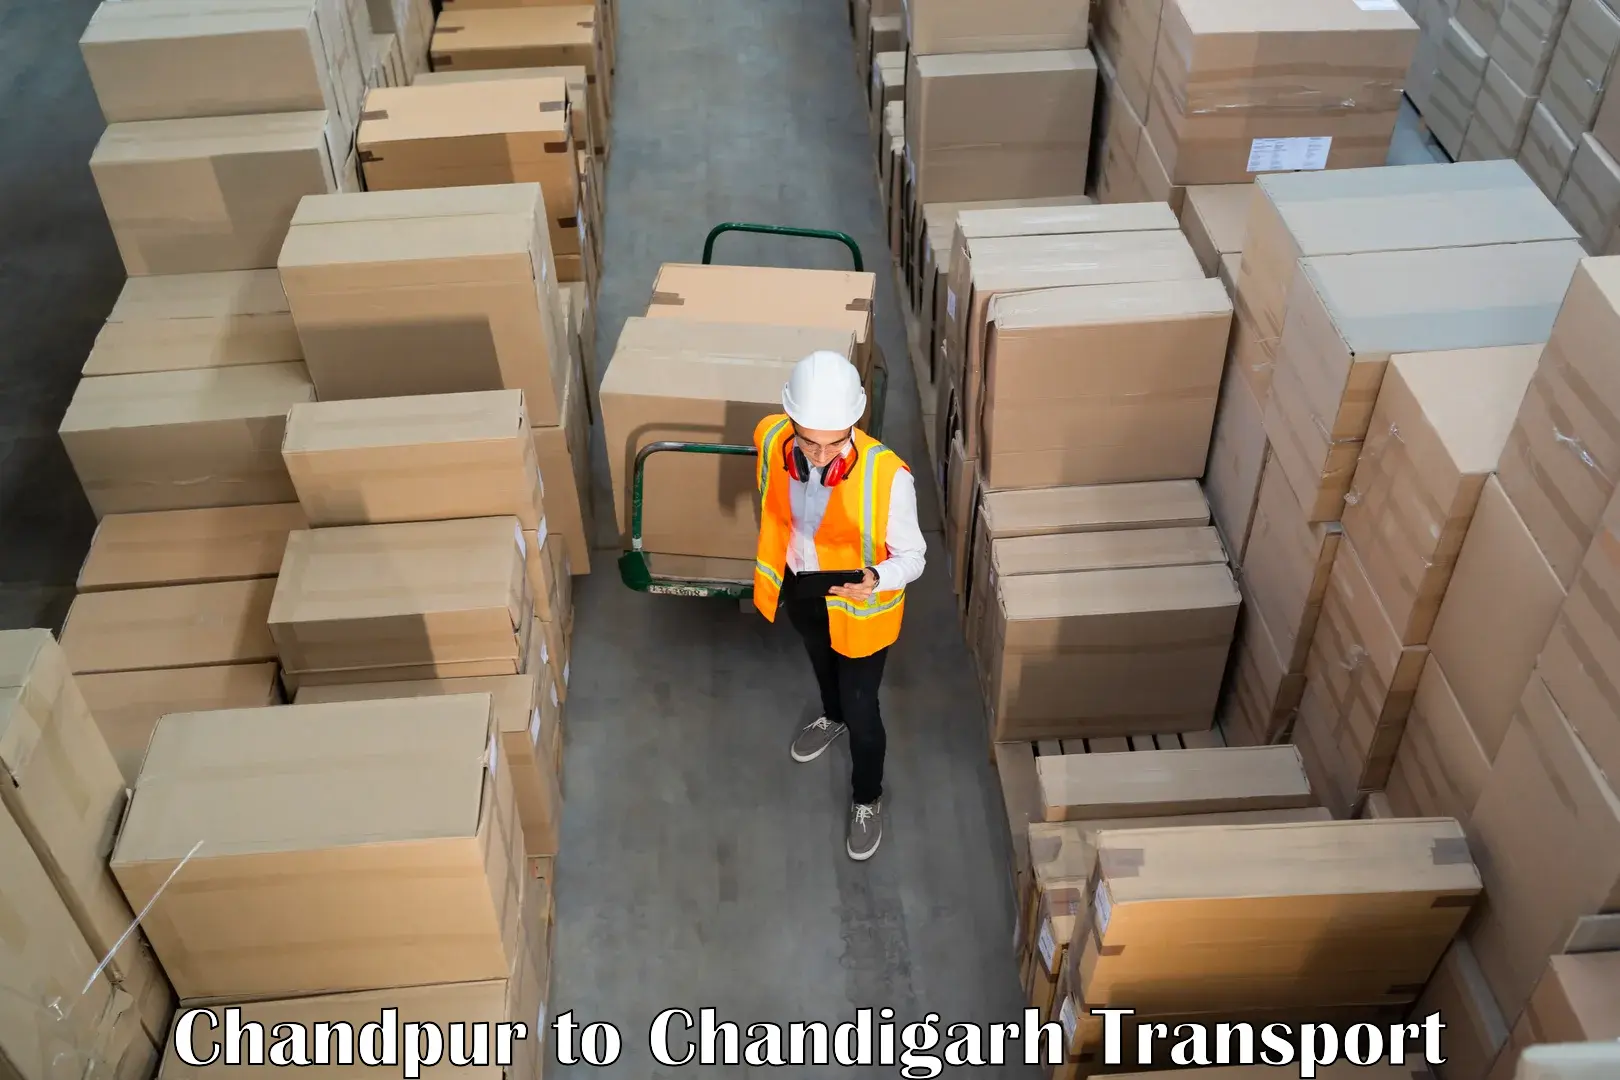 Part load transport service in India Chandpur to Chandigarh